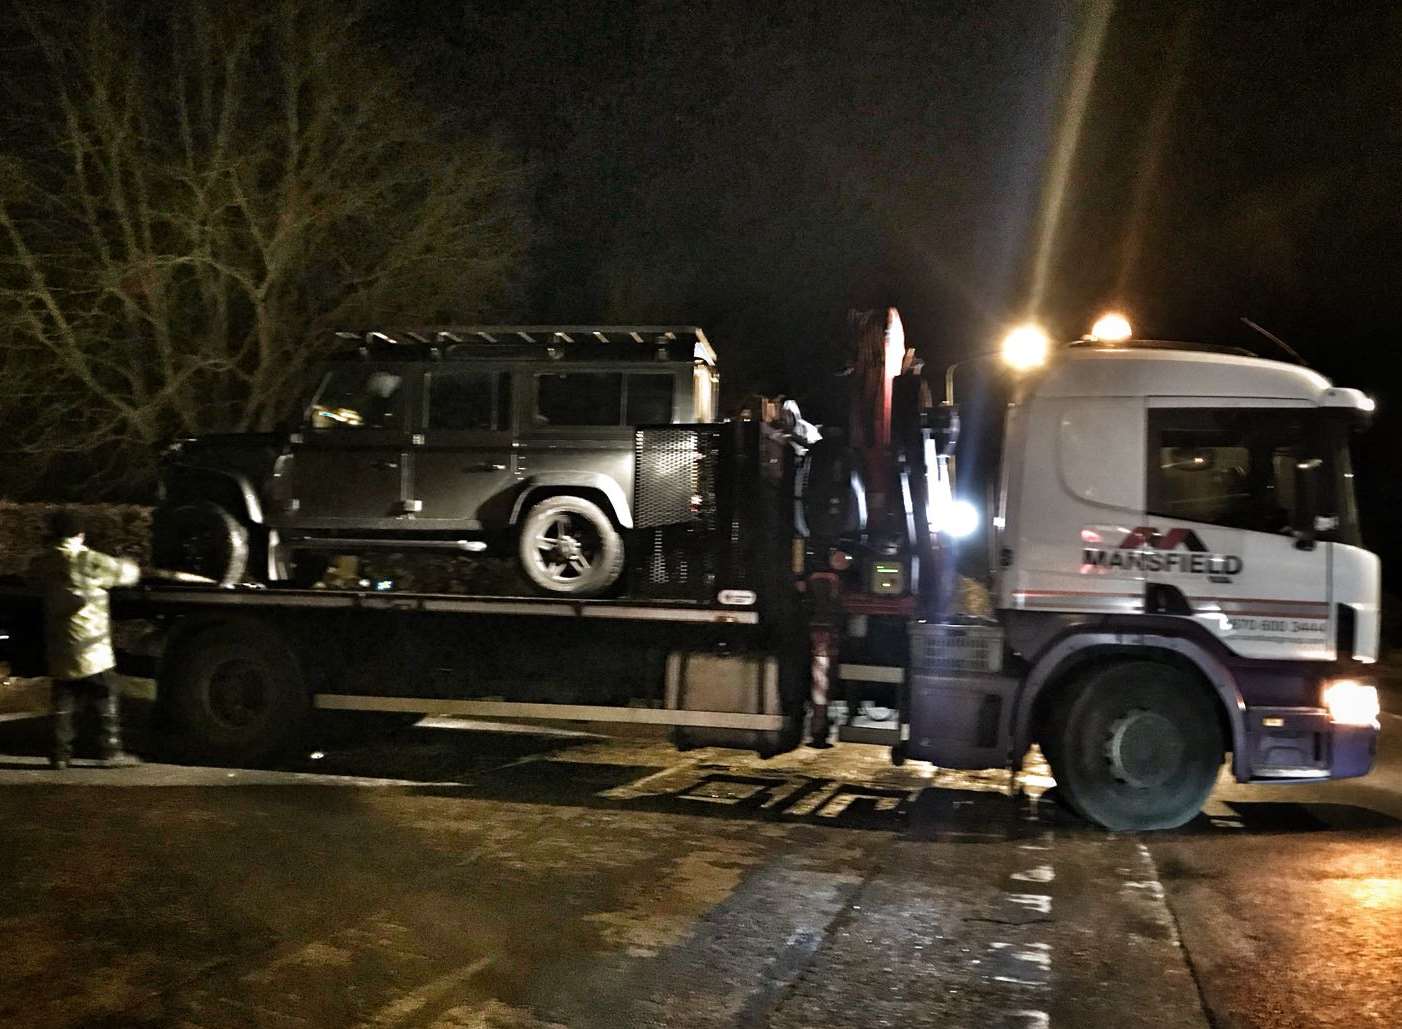 The Landrover has been recovered. Picture: @kentpoliceroads